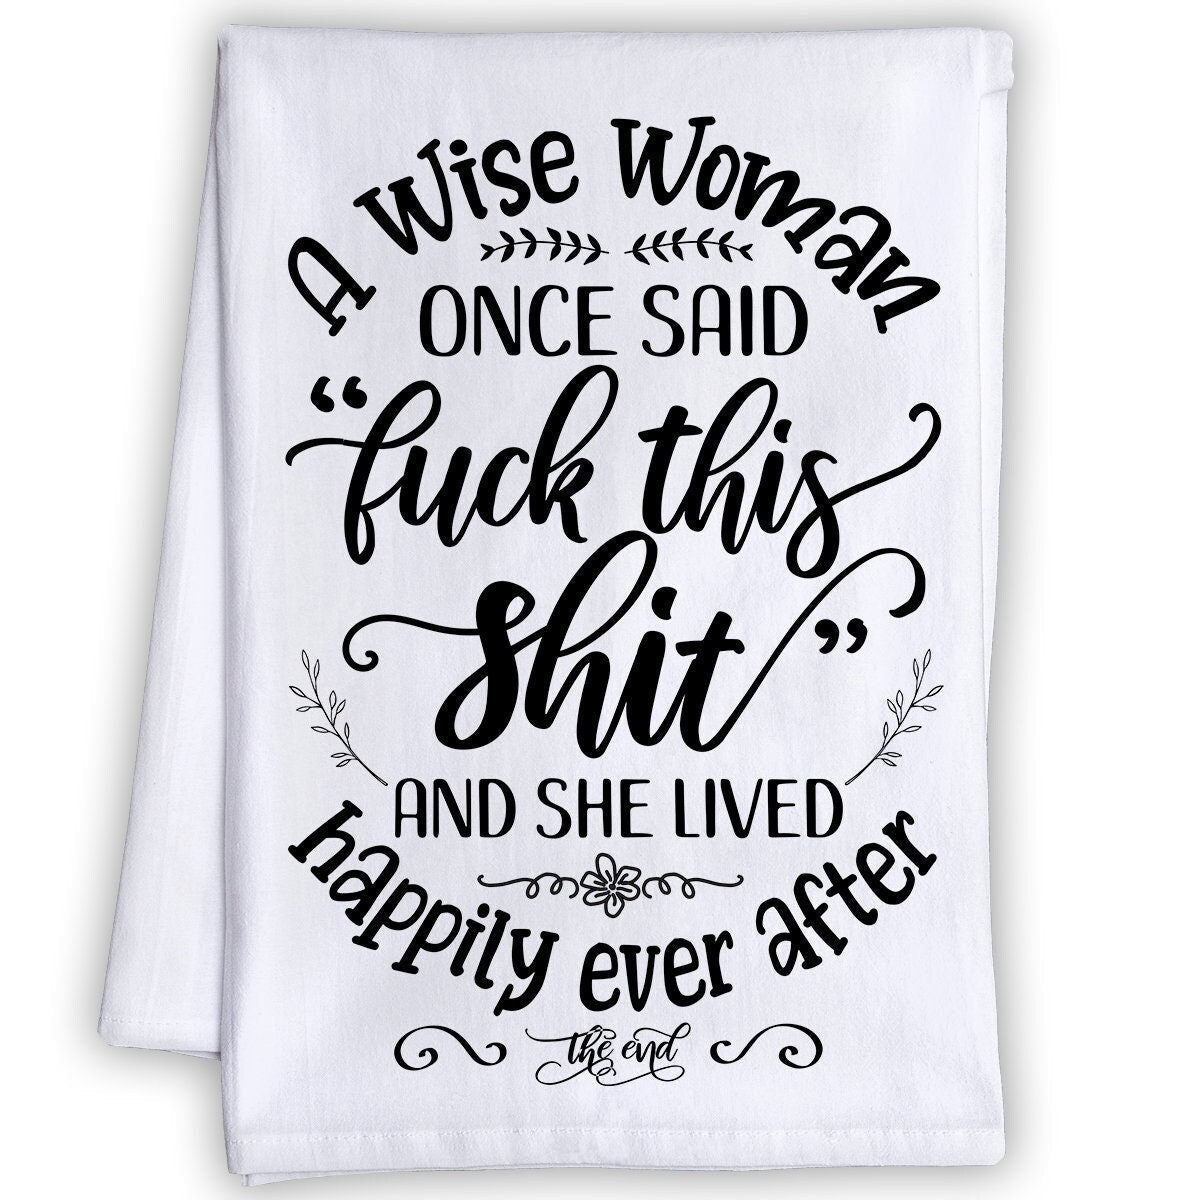 Funny Kitchen Tea Towels - A Wise Woman Once Said - Humorous Fun Sayings Sack Dish Towel - Cute Gift for Housewarming and Fun Home Decor Lone Star Art 